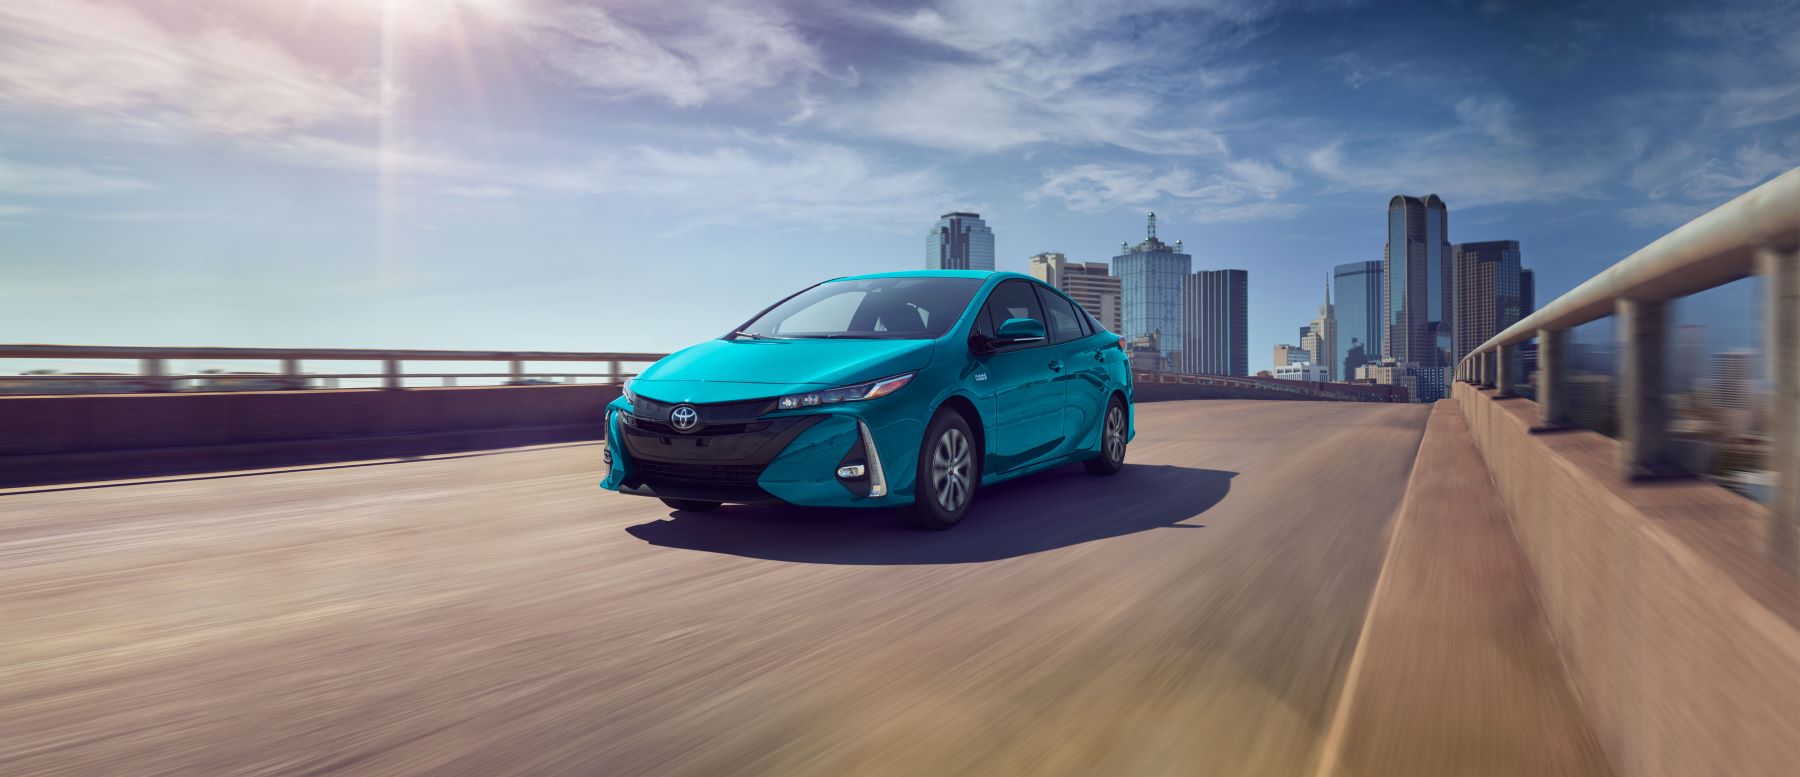 The 2022 Toyota Prius Prime plug-in hybrid (PHEV) hatchback in teal driving over a city bridge